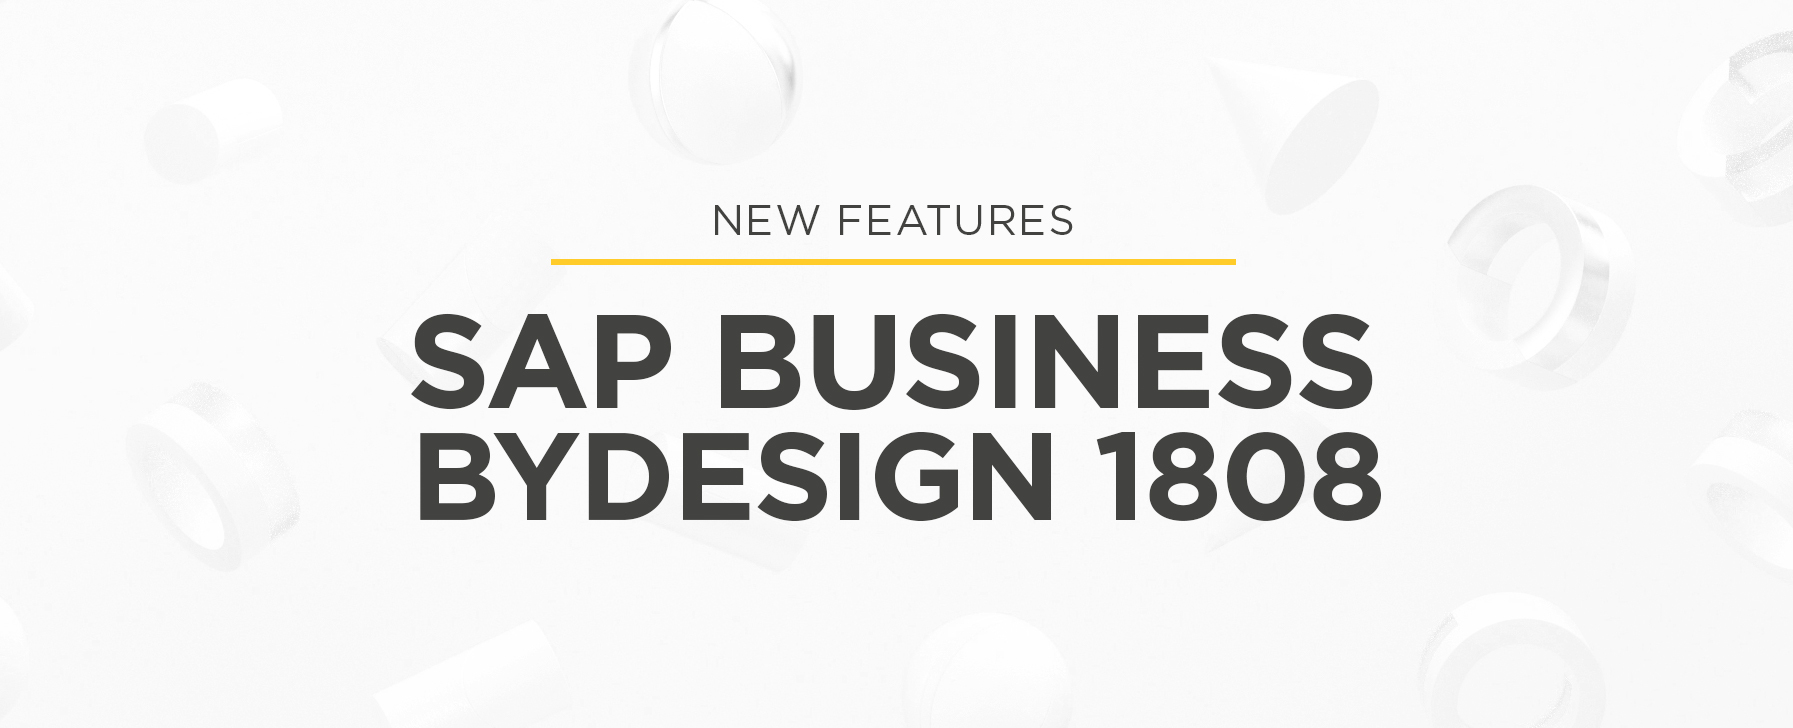 New Features of SAP Business ByDesign 1808